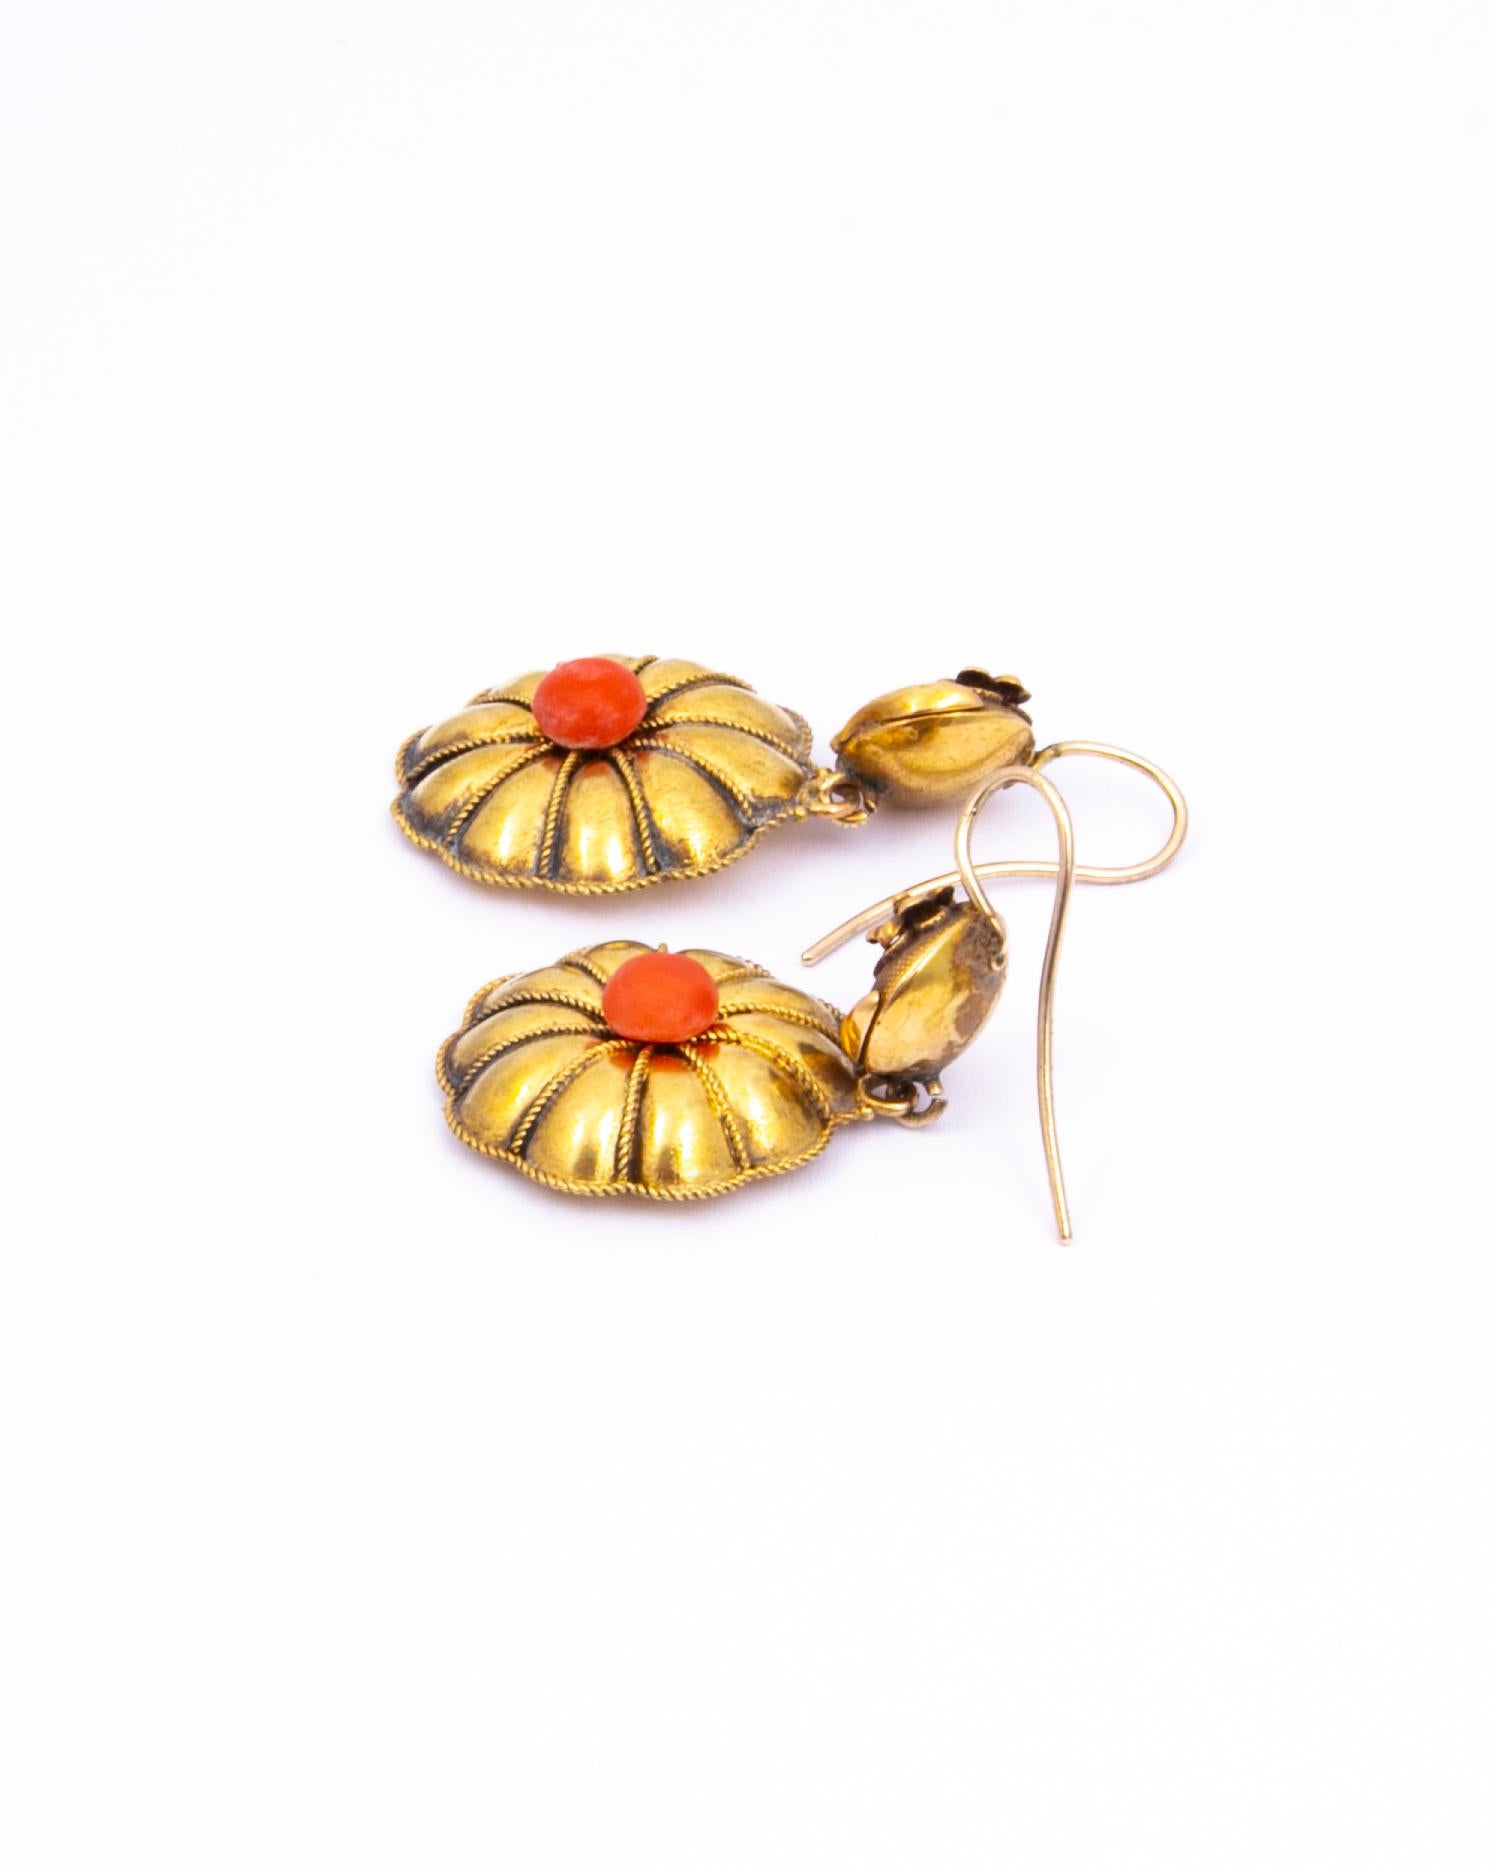 These statement earrings are modelled in 18ct gold and have a smooth round piece of coral at the centre if the drops. Above these drops there are fabric like textured circles with a delicate flower wrapped around them. 

Drop From Ear: 41mm 
Bottom